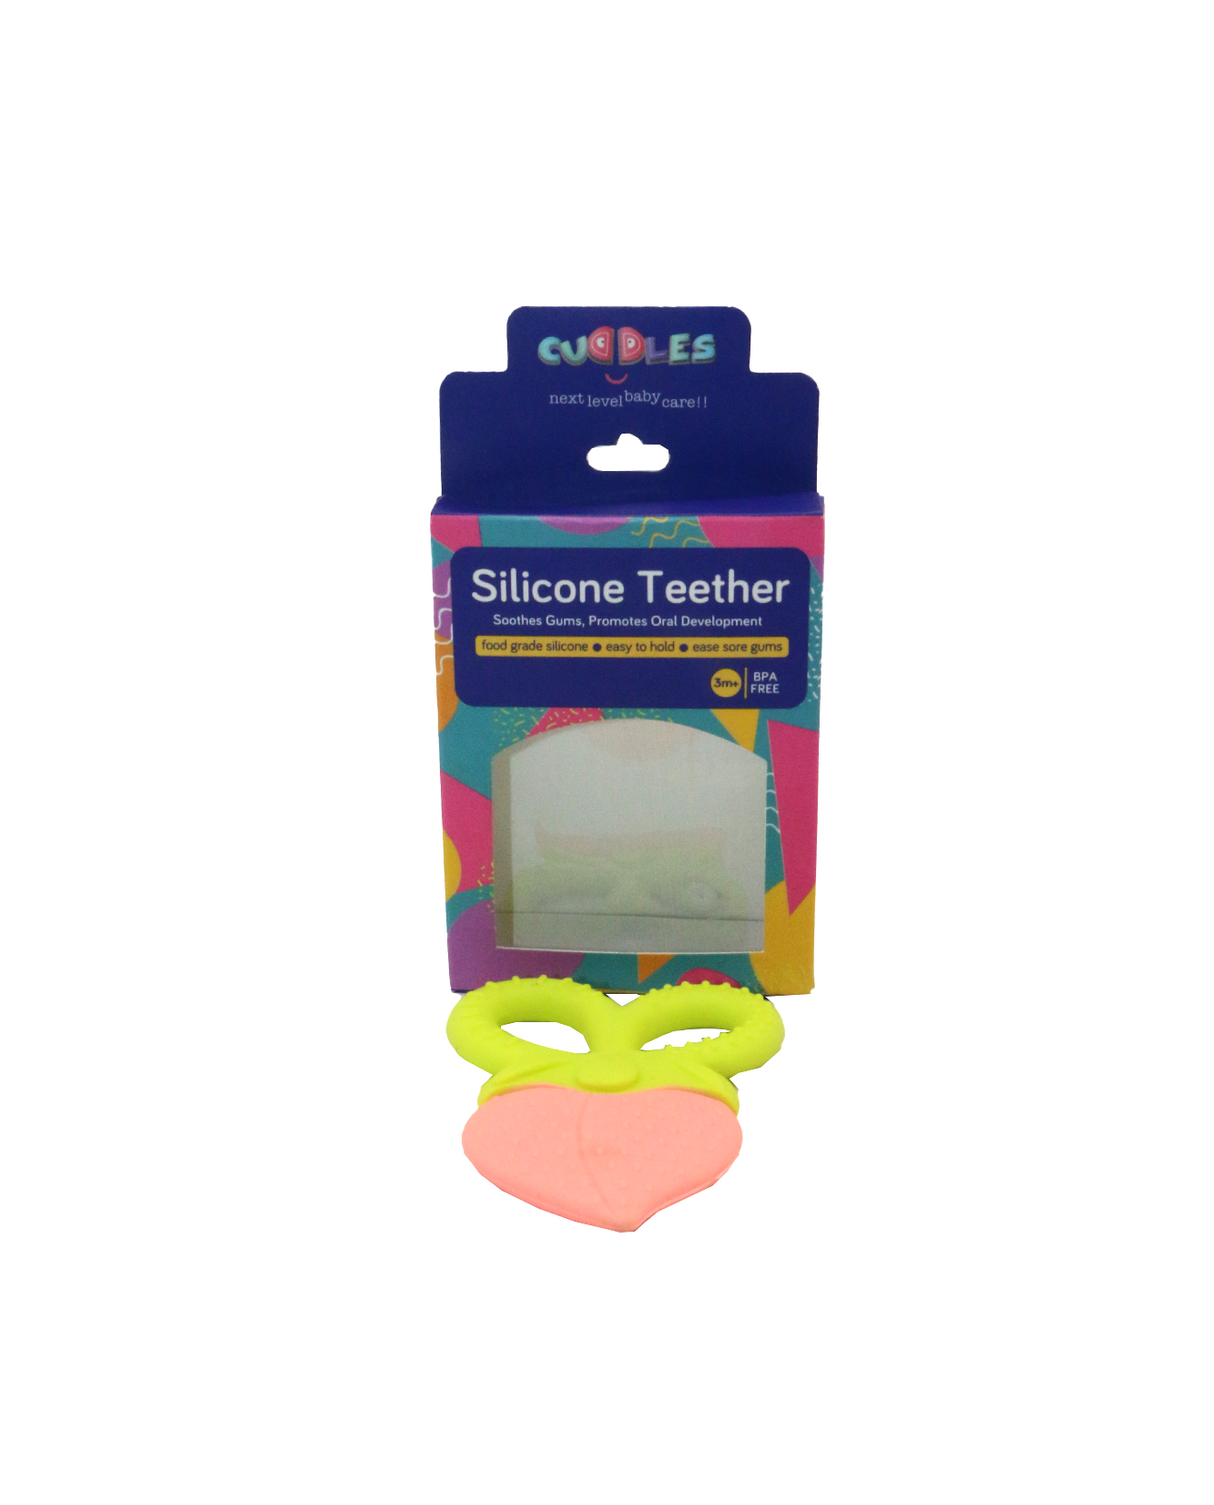 cuddles silicone teether